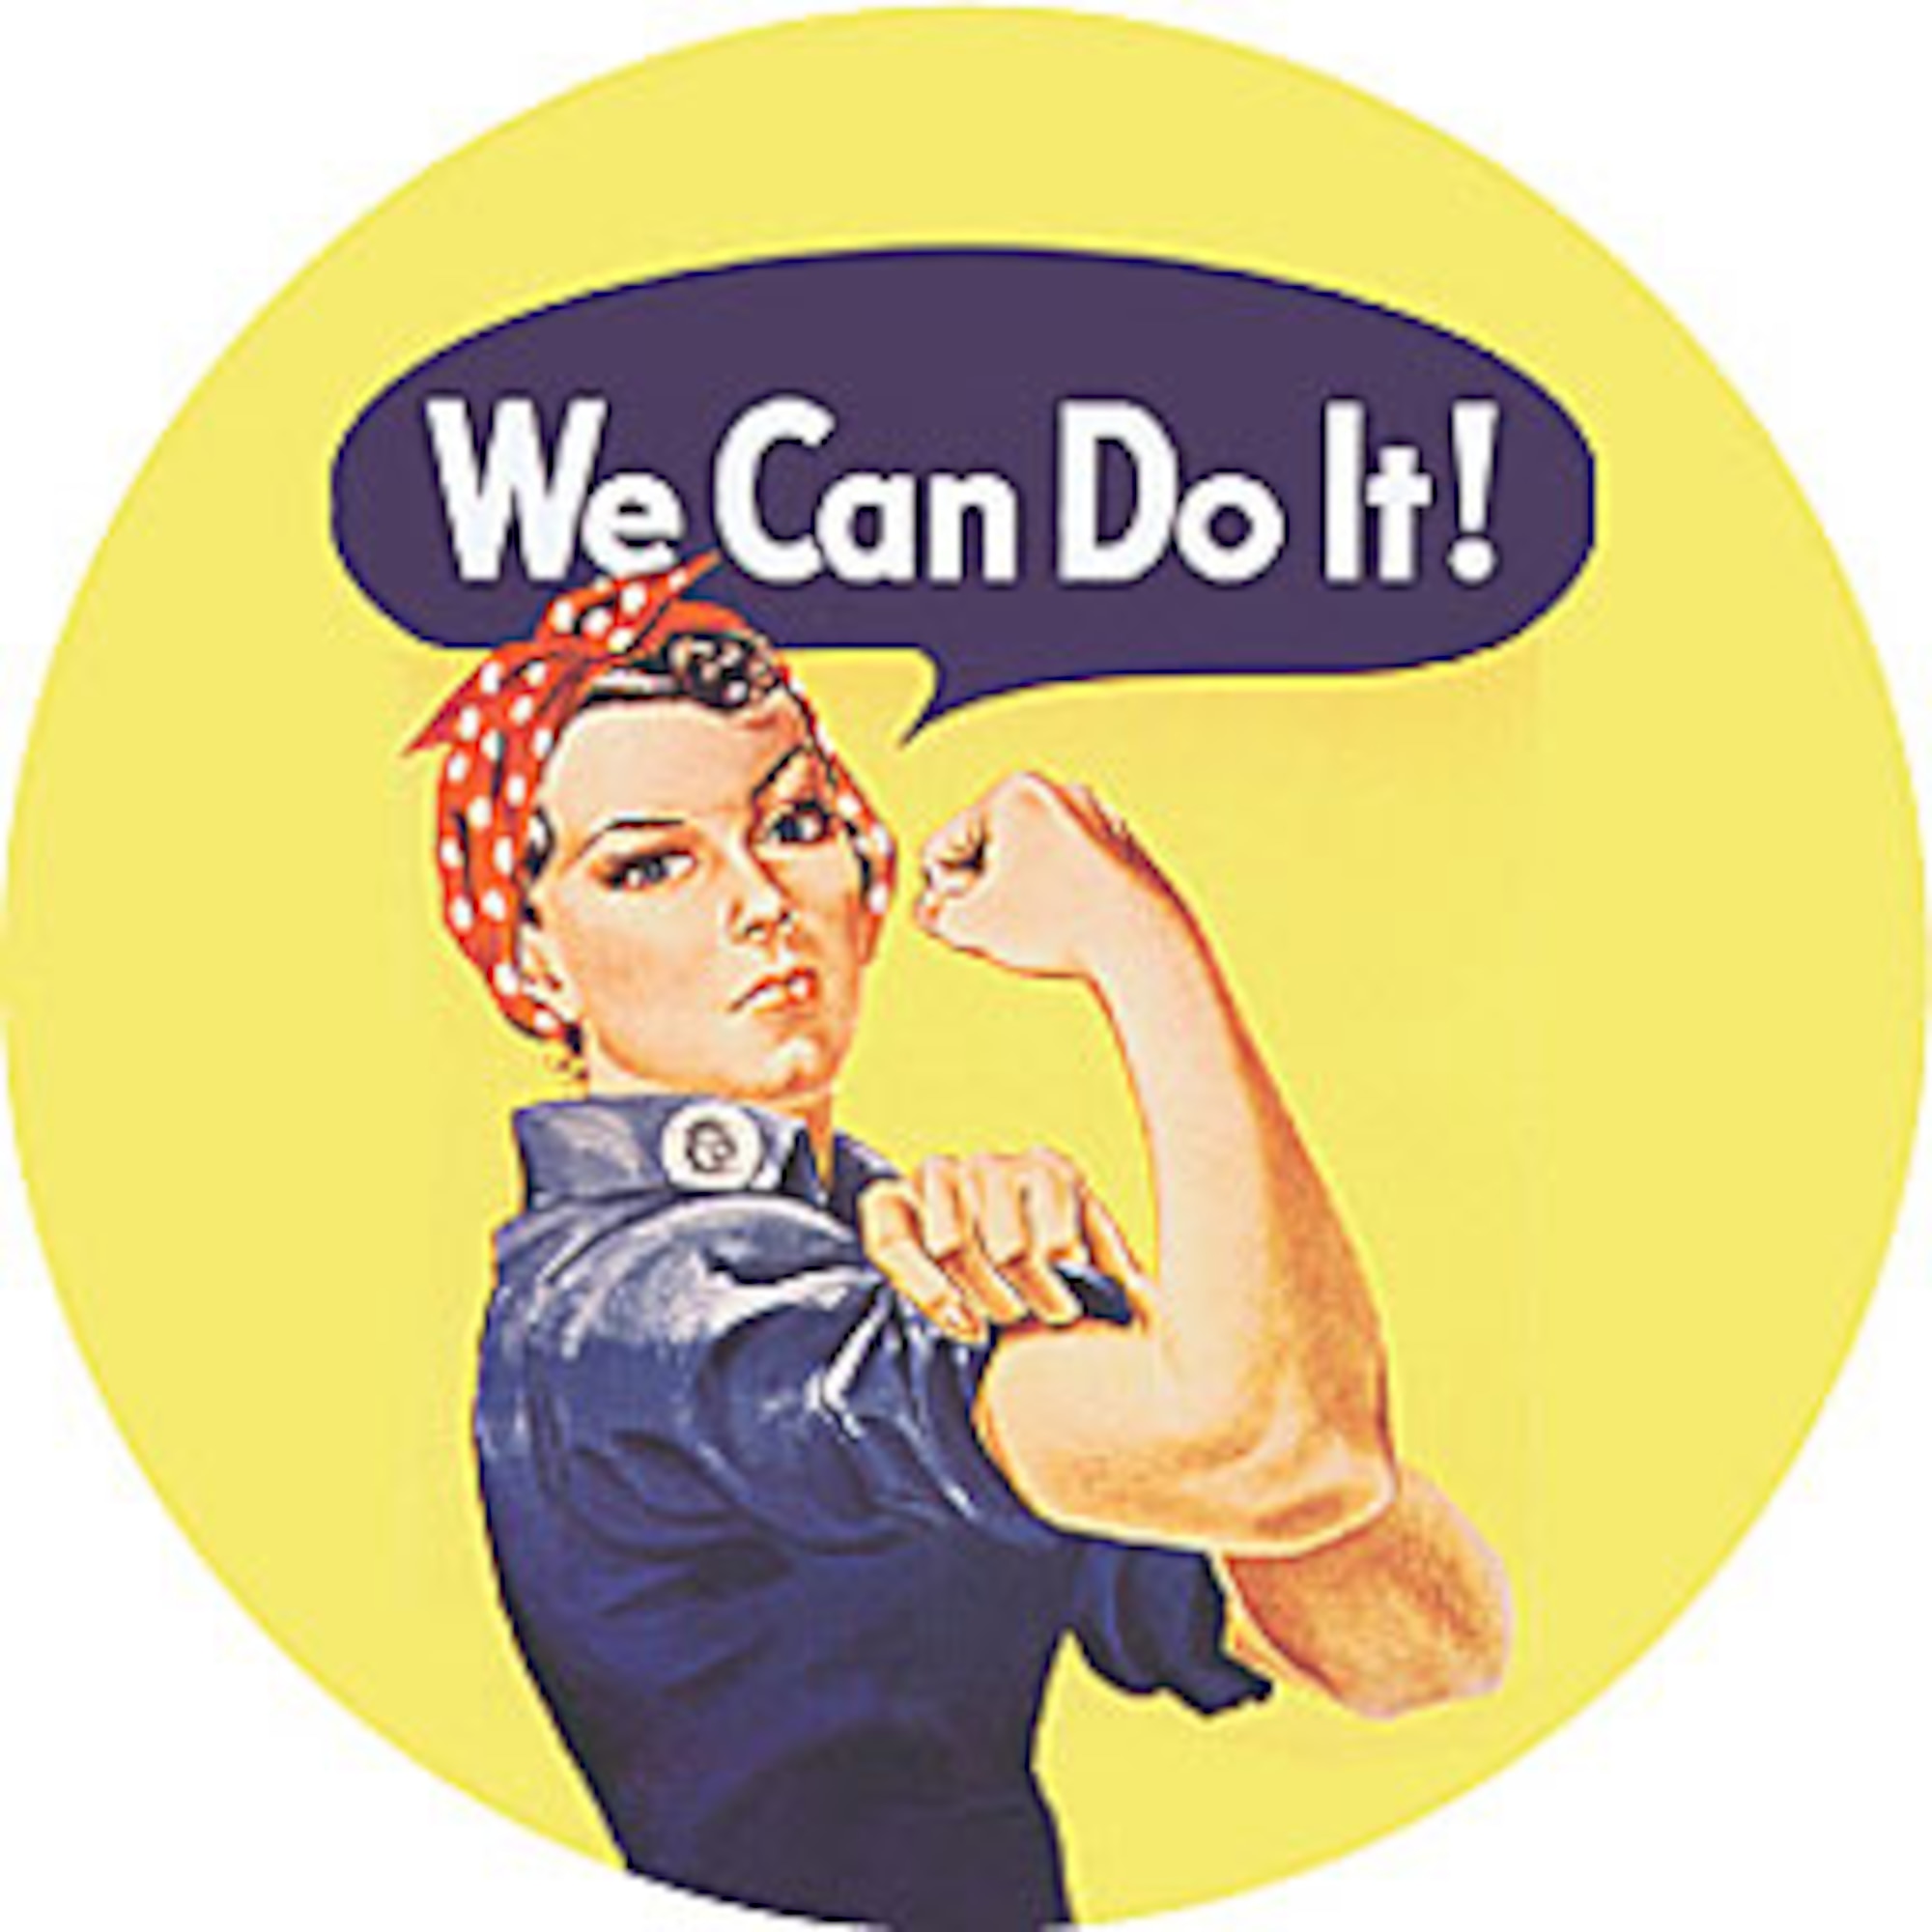 We can star. Плакат «we can do it! ». Плакаты в стиле we can do it. Женщина we can do it. Плакат феминистка we can do it.